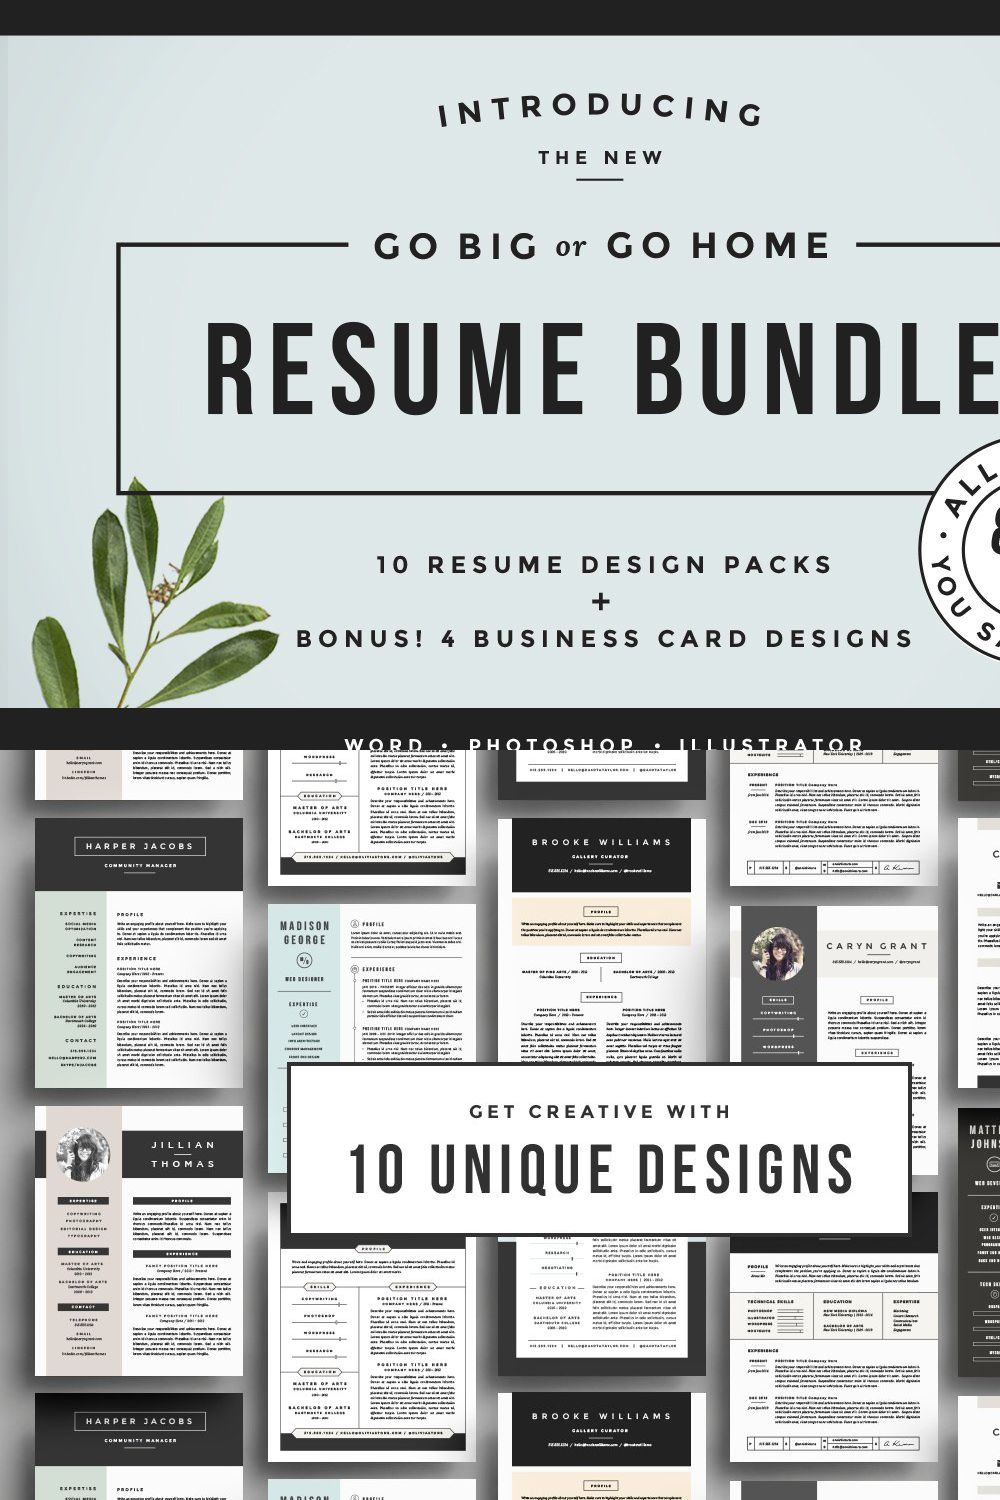 Go Big or Go Home! The Resume Bundle pinterest preview image.